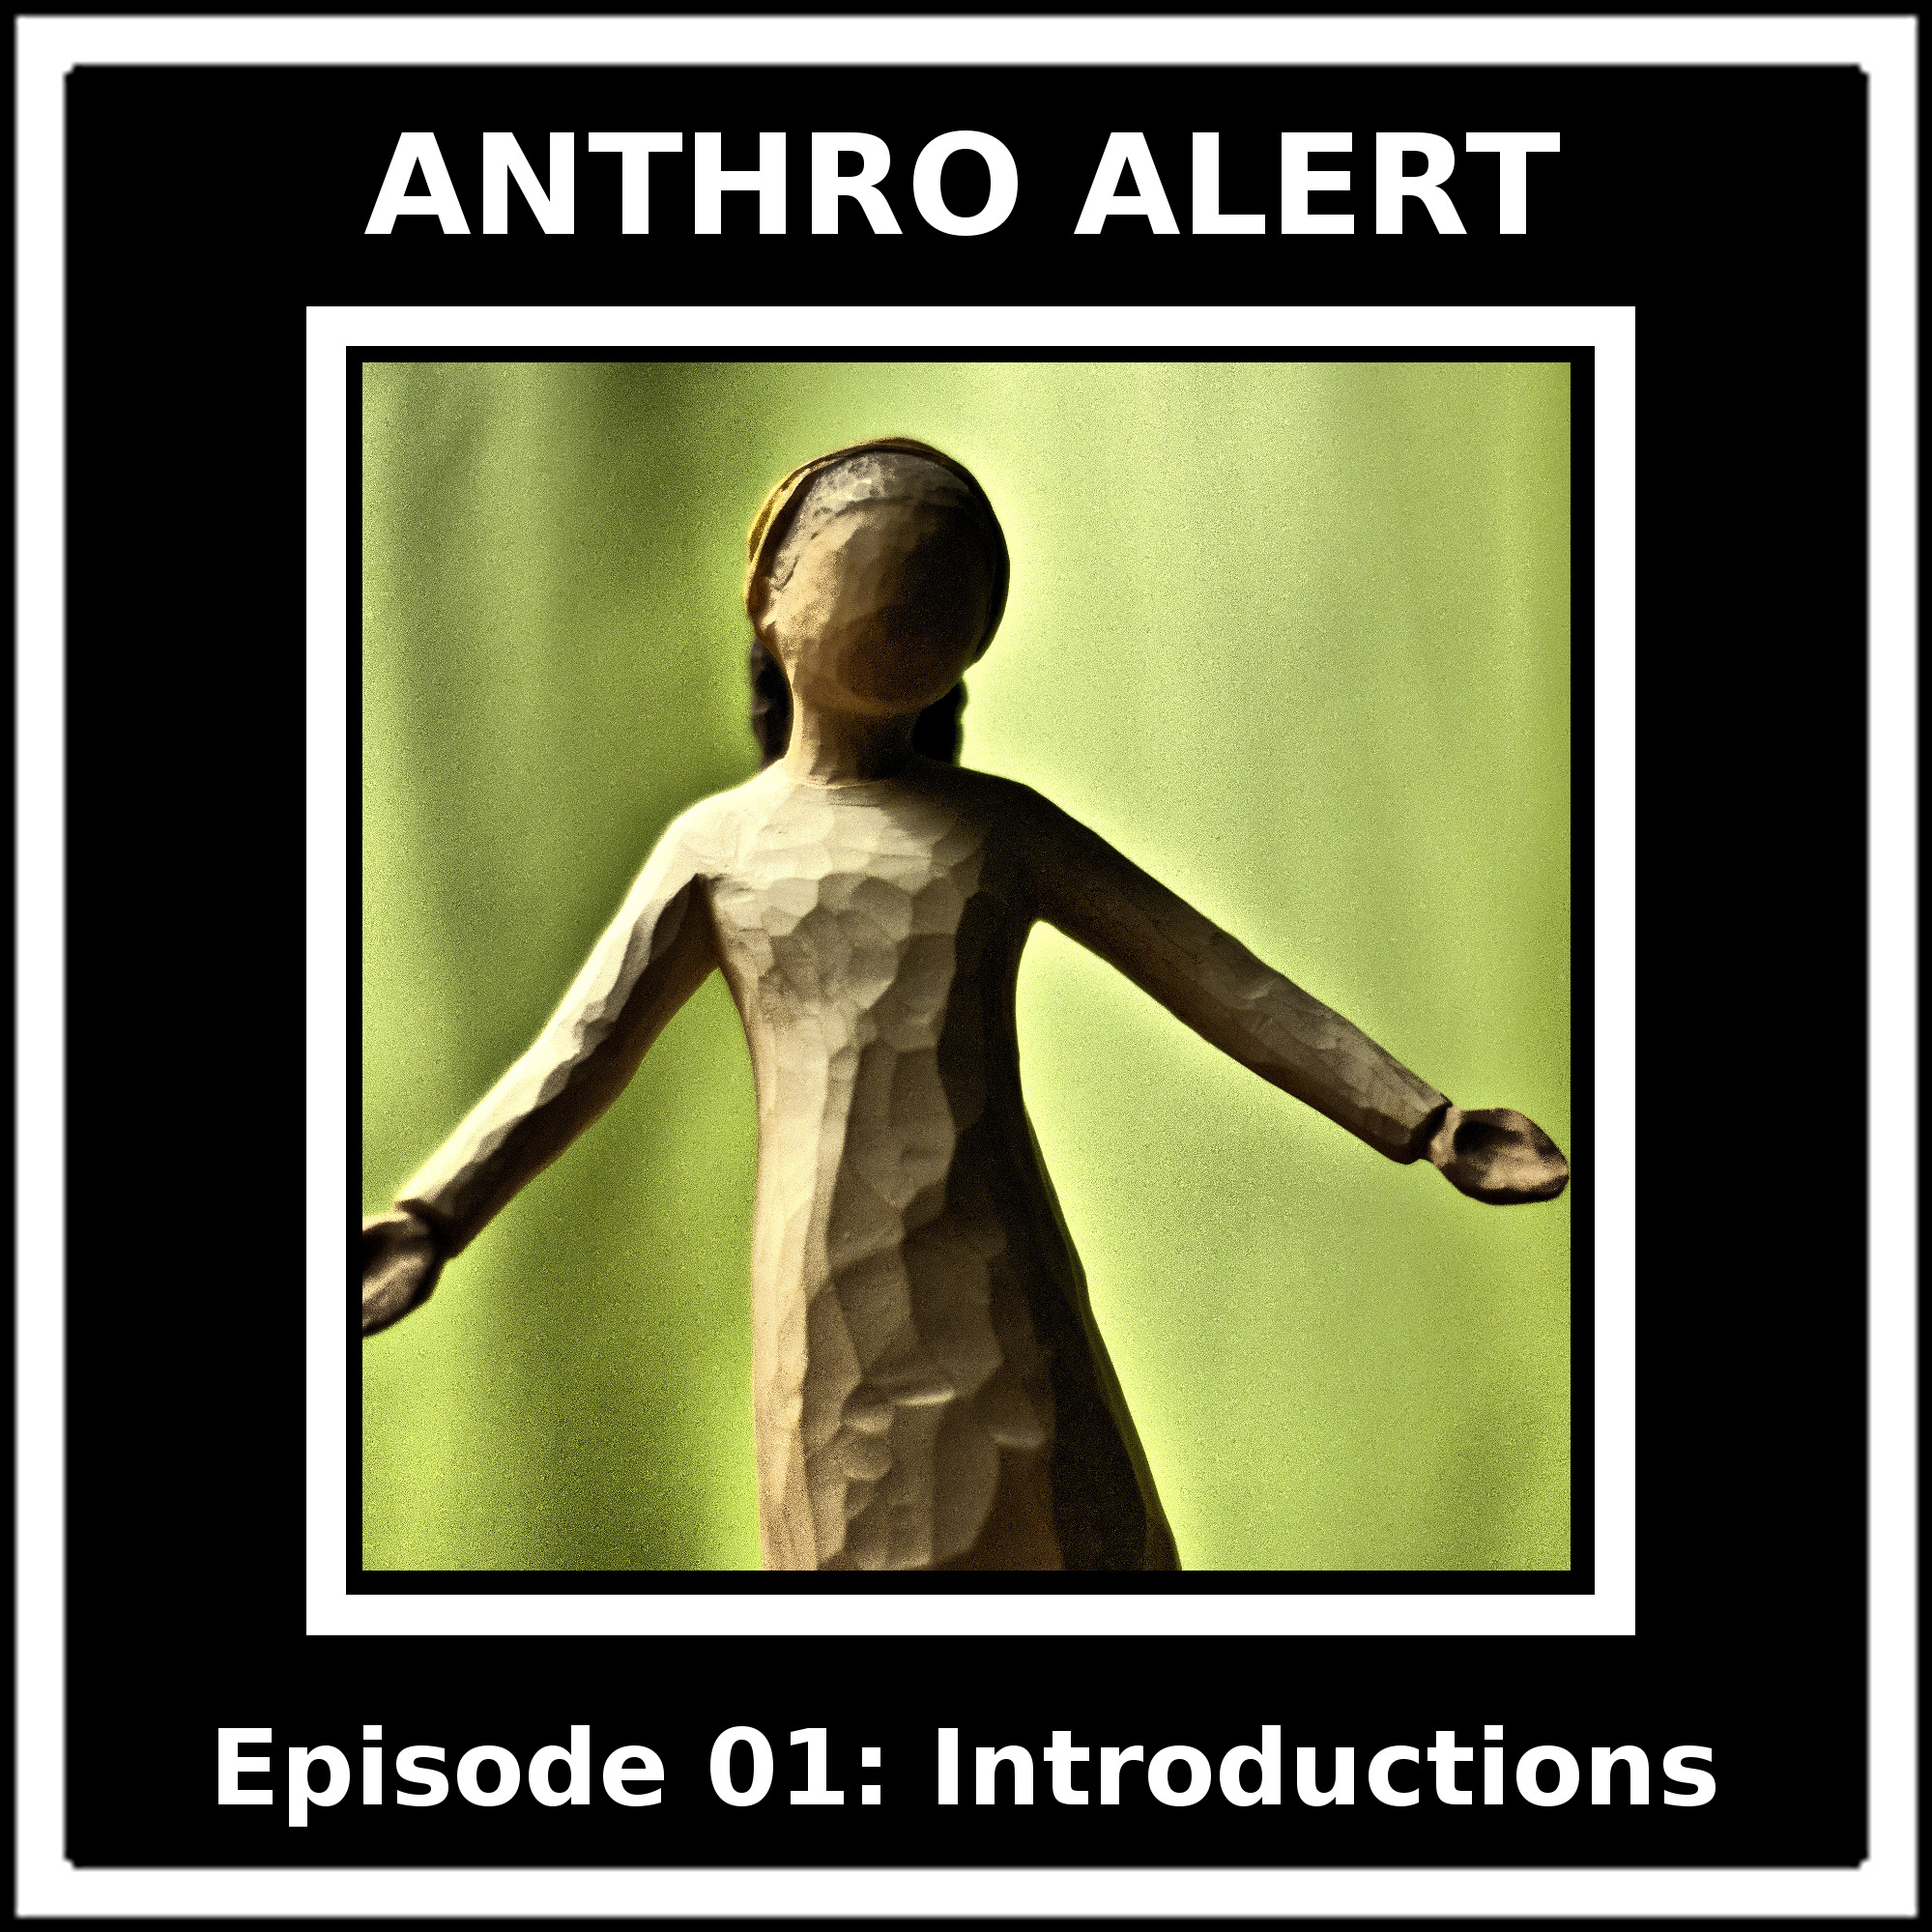 Episode 01: Introductions